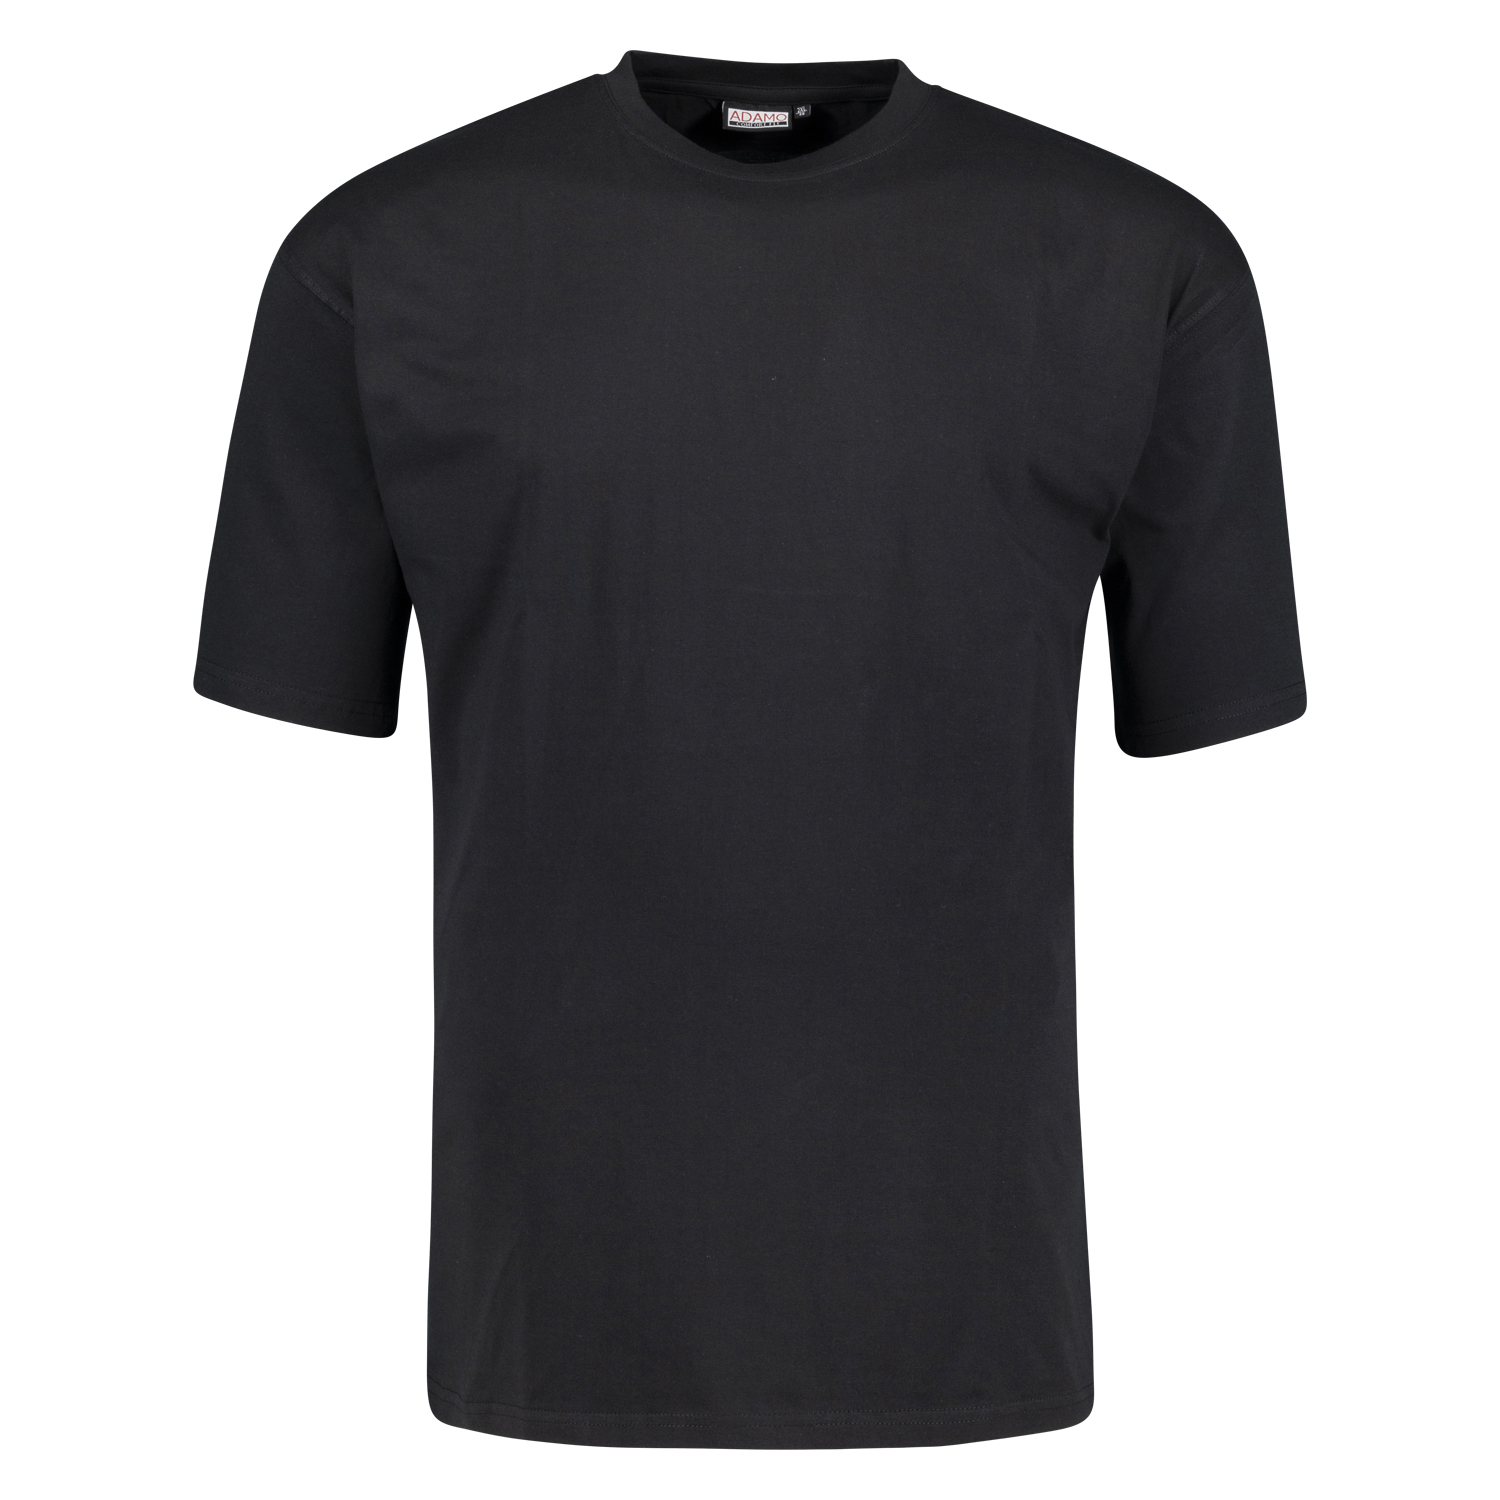 Black double pack Marlon COMFORT FIT t-shirt by ADAMO up to kingsize 18XL